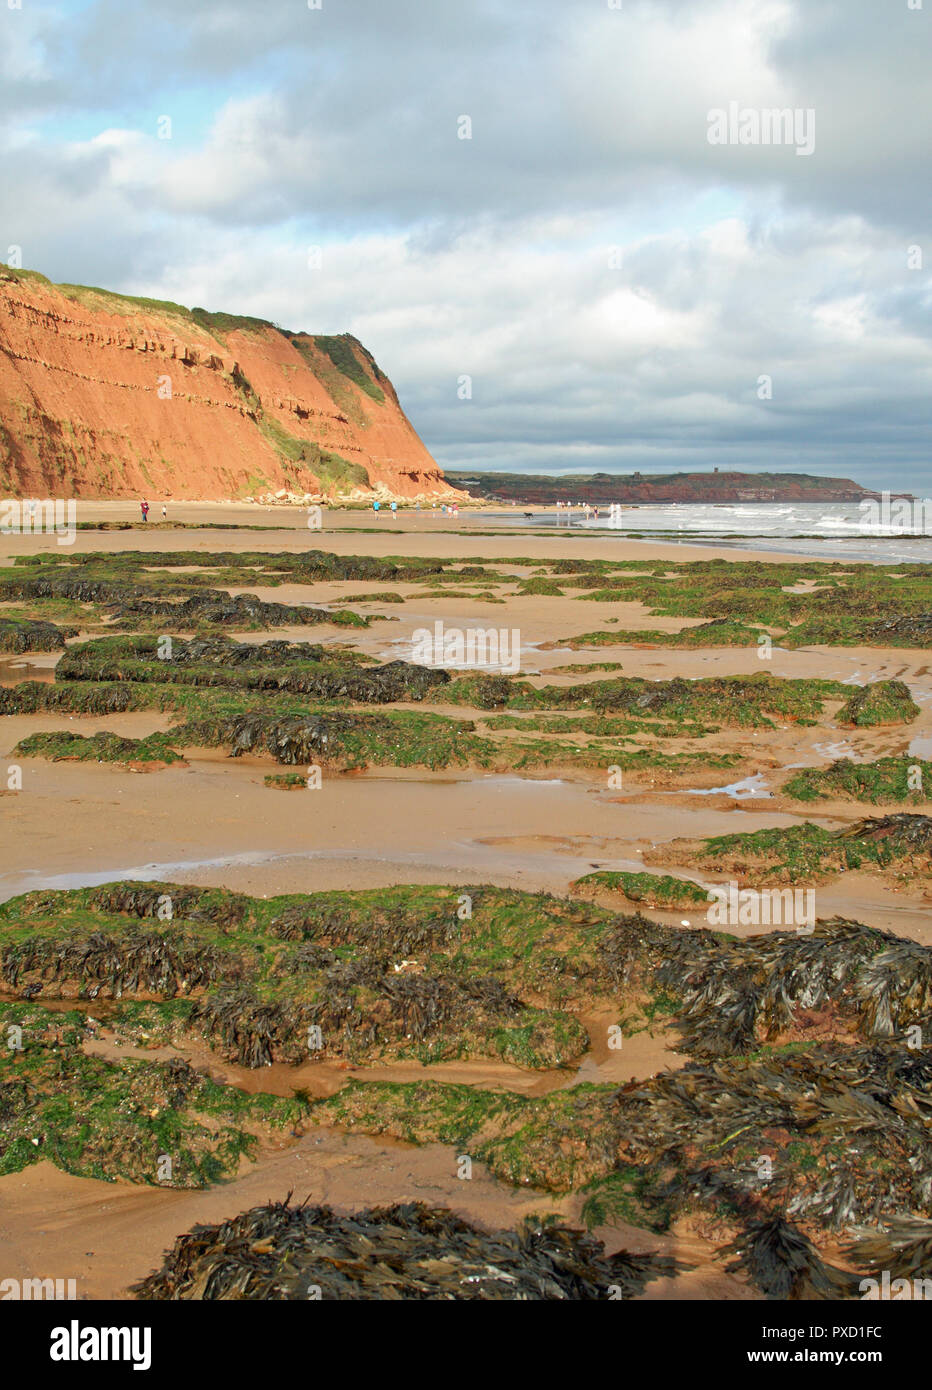 Low tide on the beach at Orcombe Point, Exmouth, Devon, England, UK Stock Photo